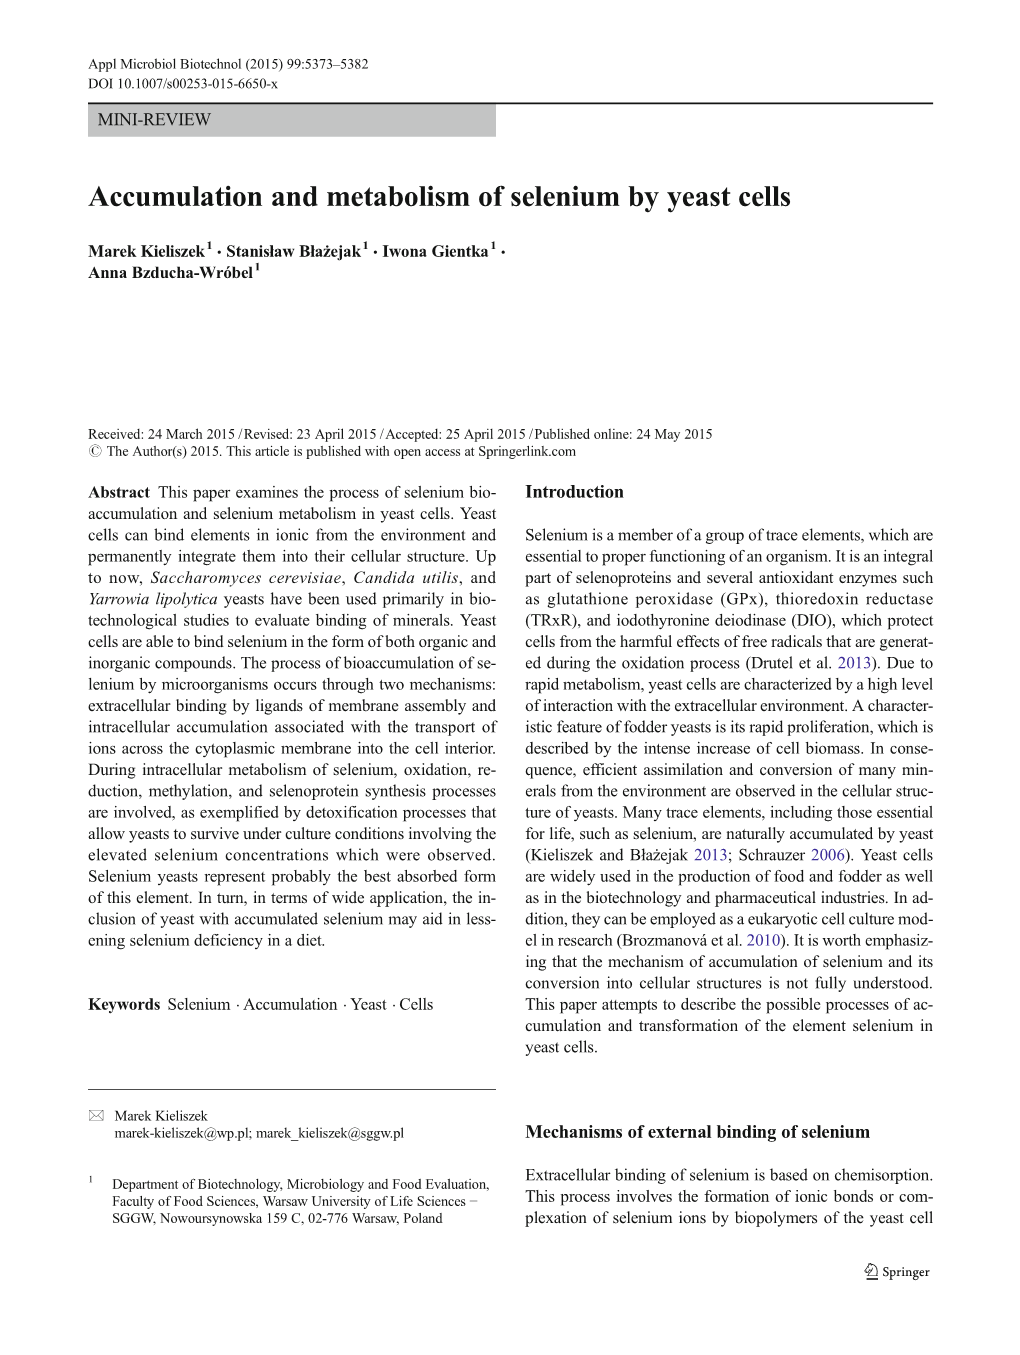 Accumulation and Metabolism of Selenium by Yeast Cells